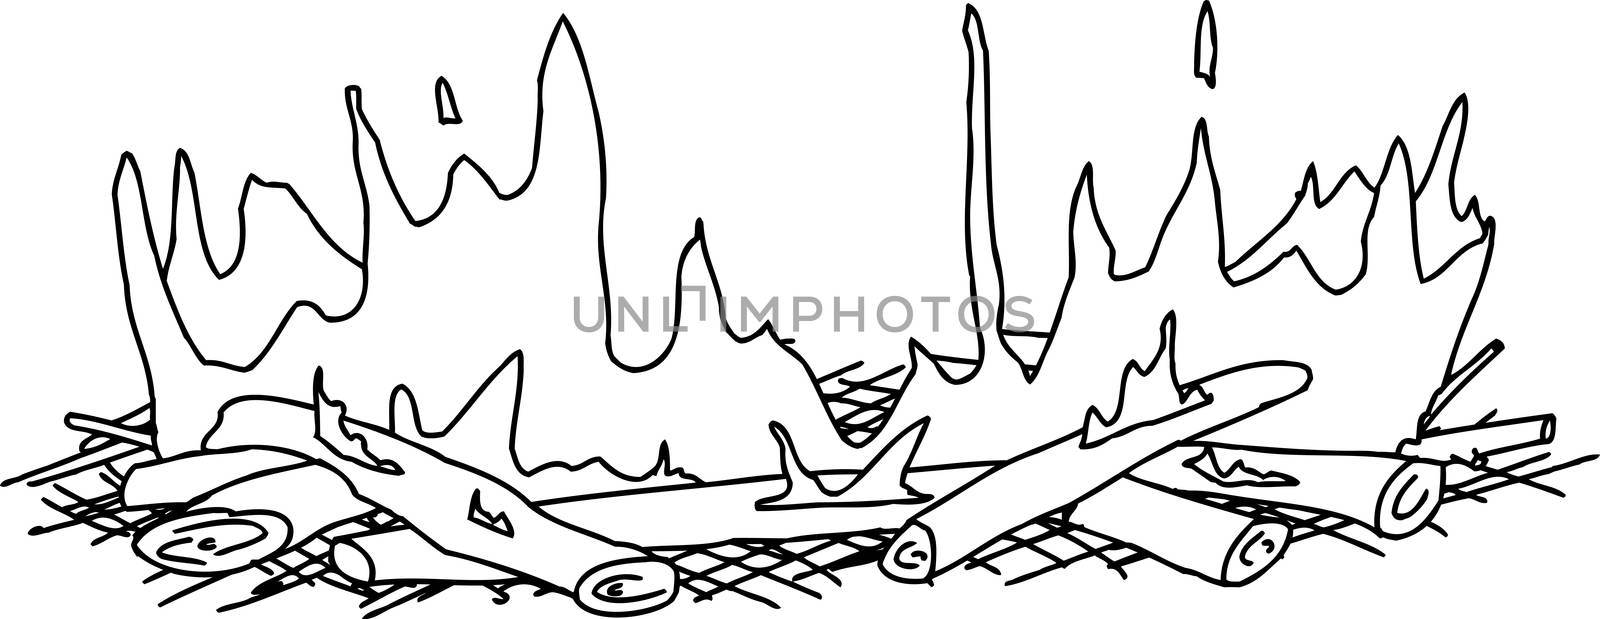 Outline cartoon of flames on sticks in campfire